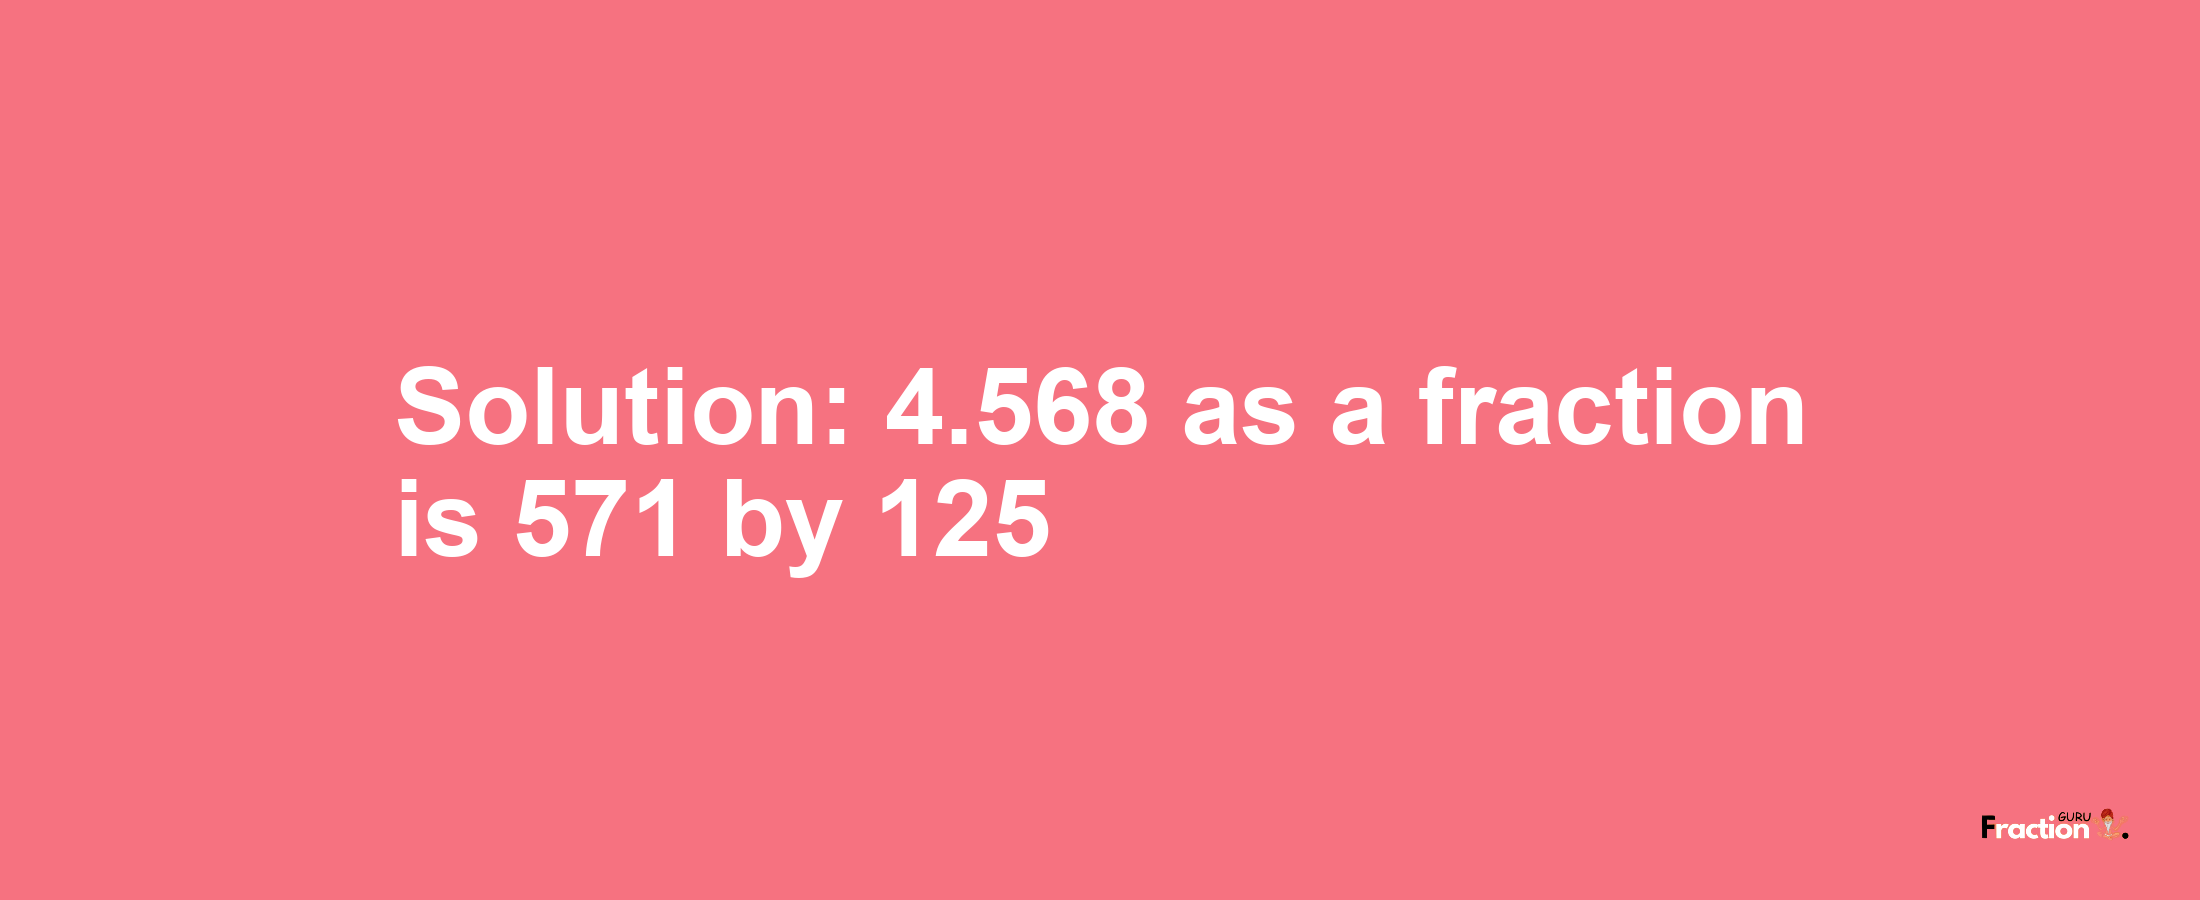 Solution:4.568 as a fraction is 571/125